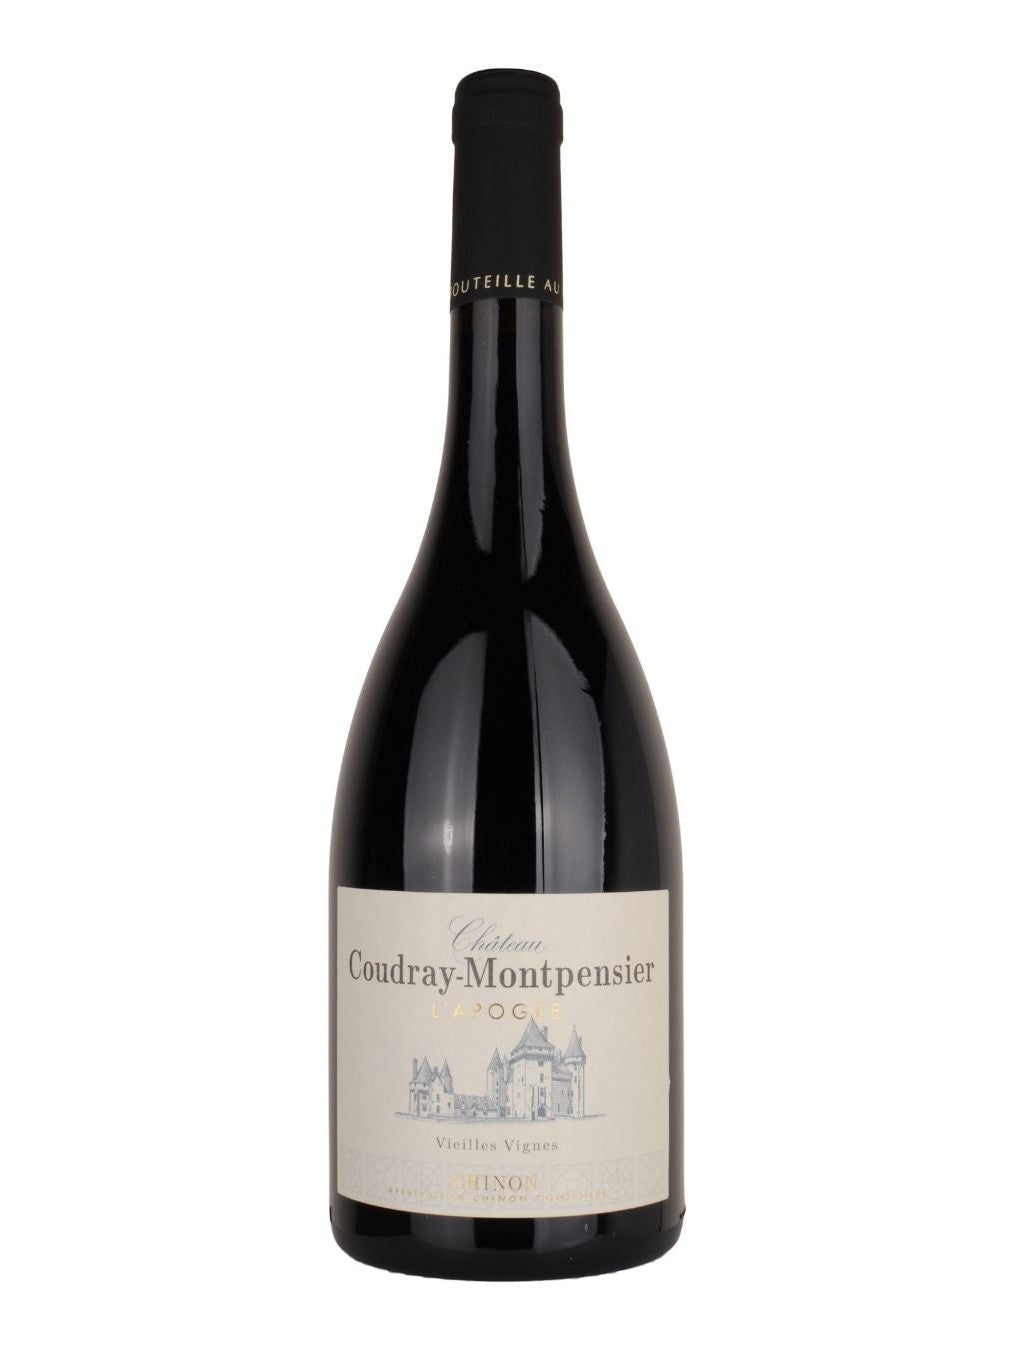 Shop Chateau Coudray-Montpensier Chateau Coudray-Montpensier Chinon l'Apogee Vieilles Vignes 2019 online at PENTICTON artisanal French wine store in Hong Kong. Discover other French wines, promotions, workshops and featured offers at pentictonpacific.com 